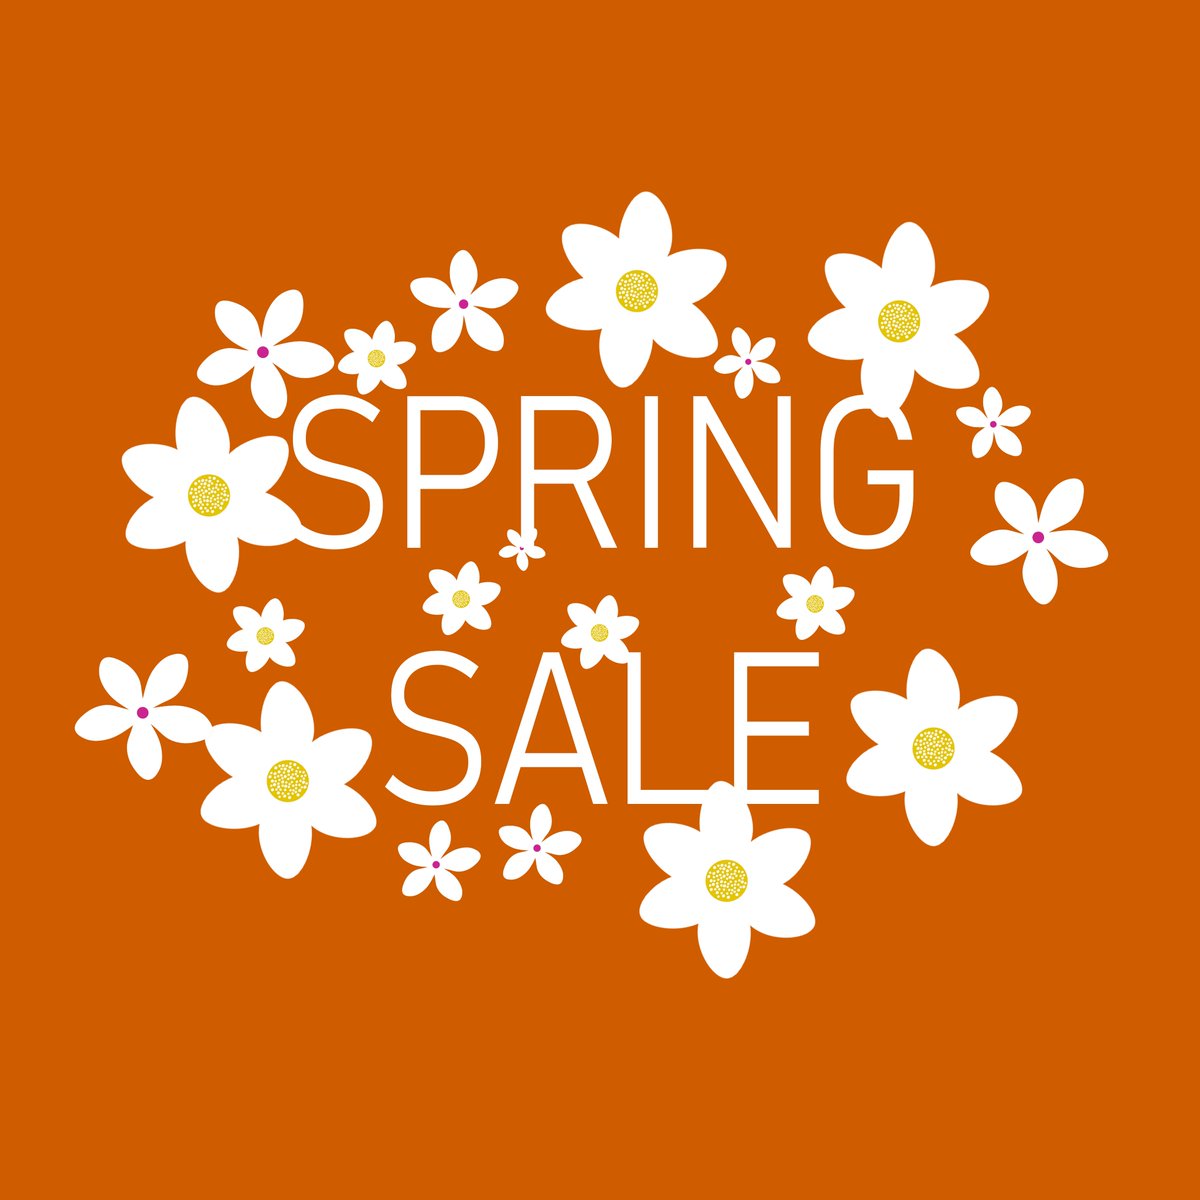 I'm having a spring sale over on my website, 25% off all art prints using code SPRING25 at the checkout. It may be rainy and windy outside, but let's be happy on the inside! karinacoghlin.com #happyart #happyartistmovement #sale #artprints #suffolk #suffolkartist